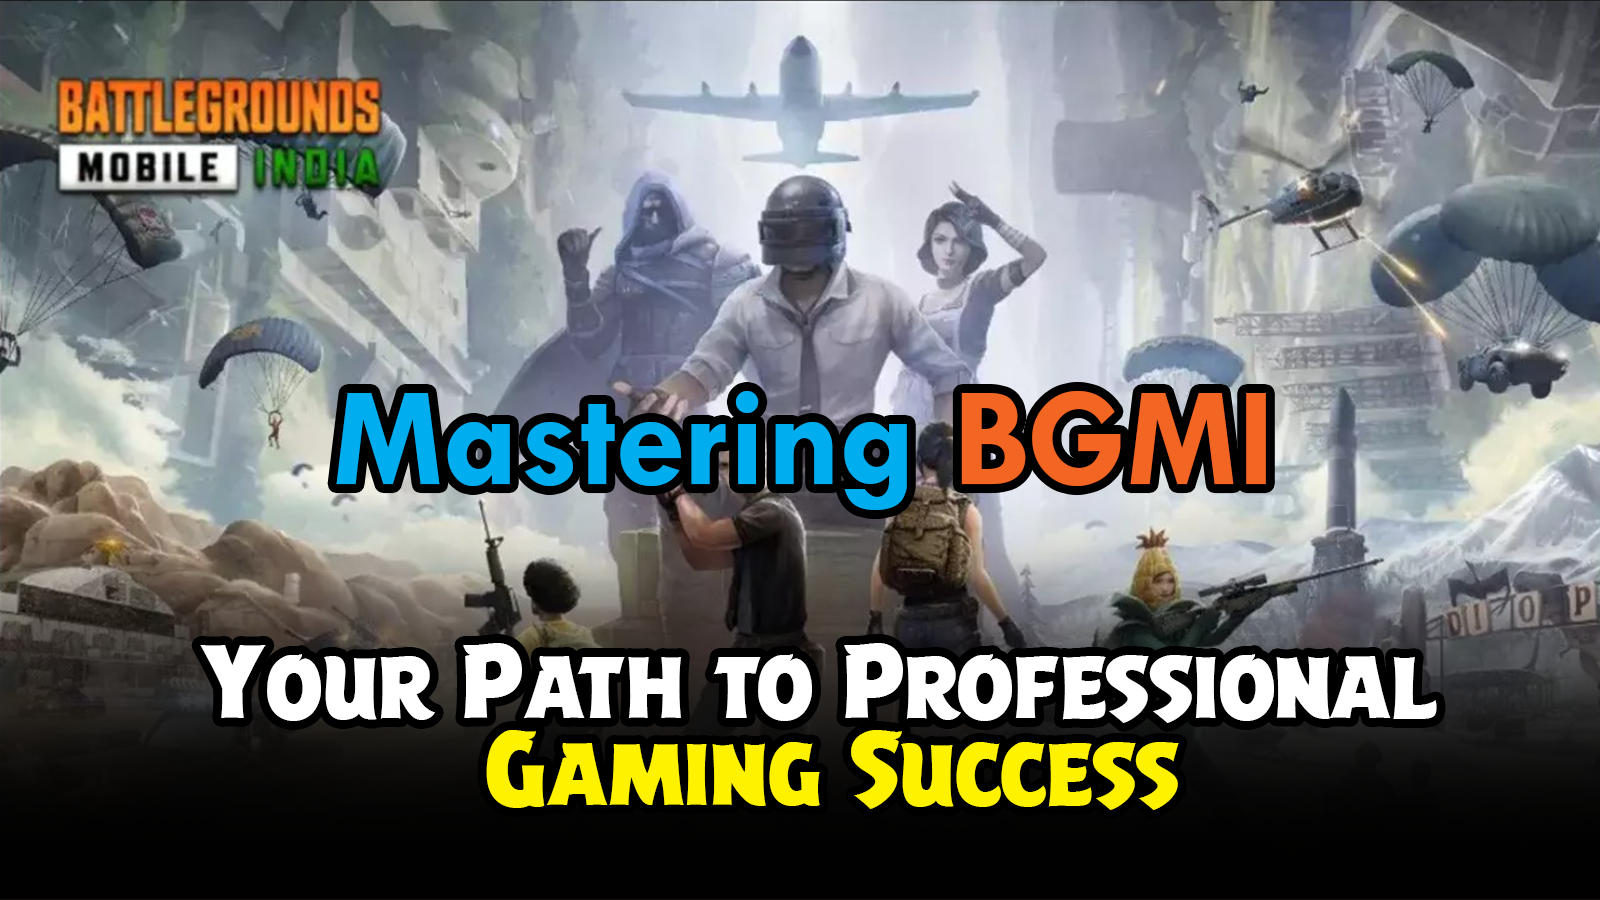 Mastering BGMI: Your Path to Professional Gaming Success